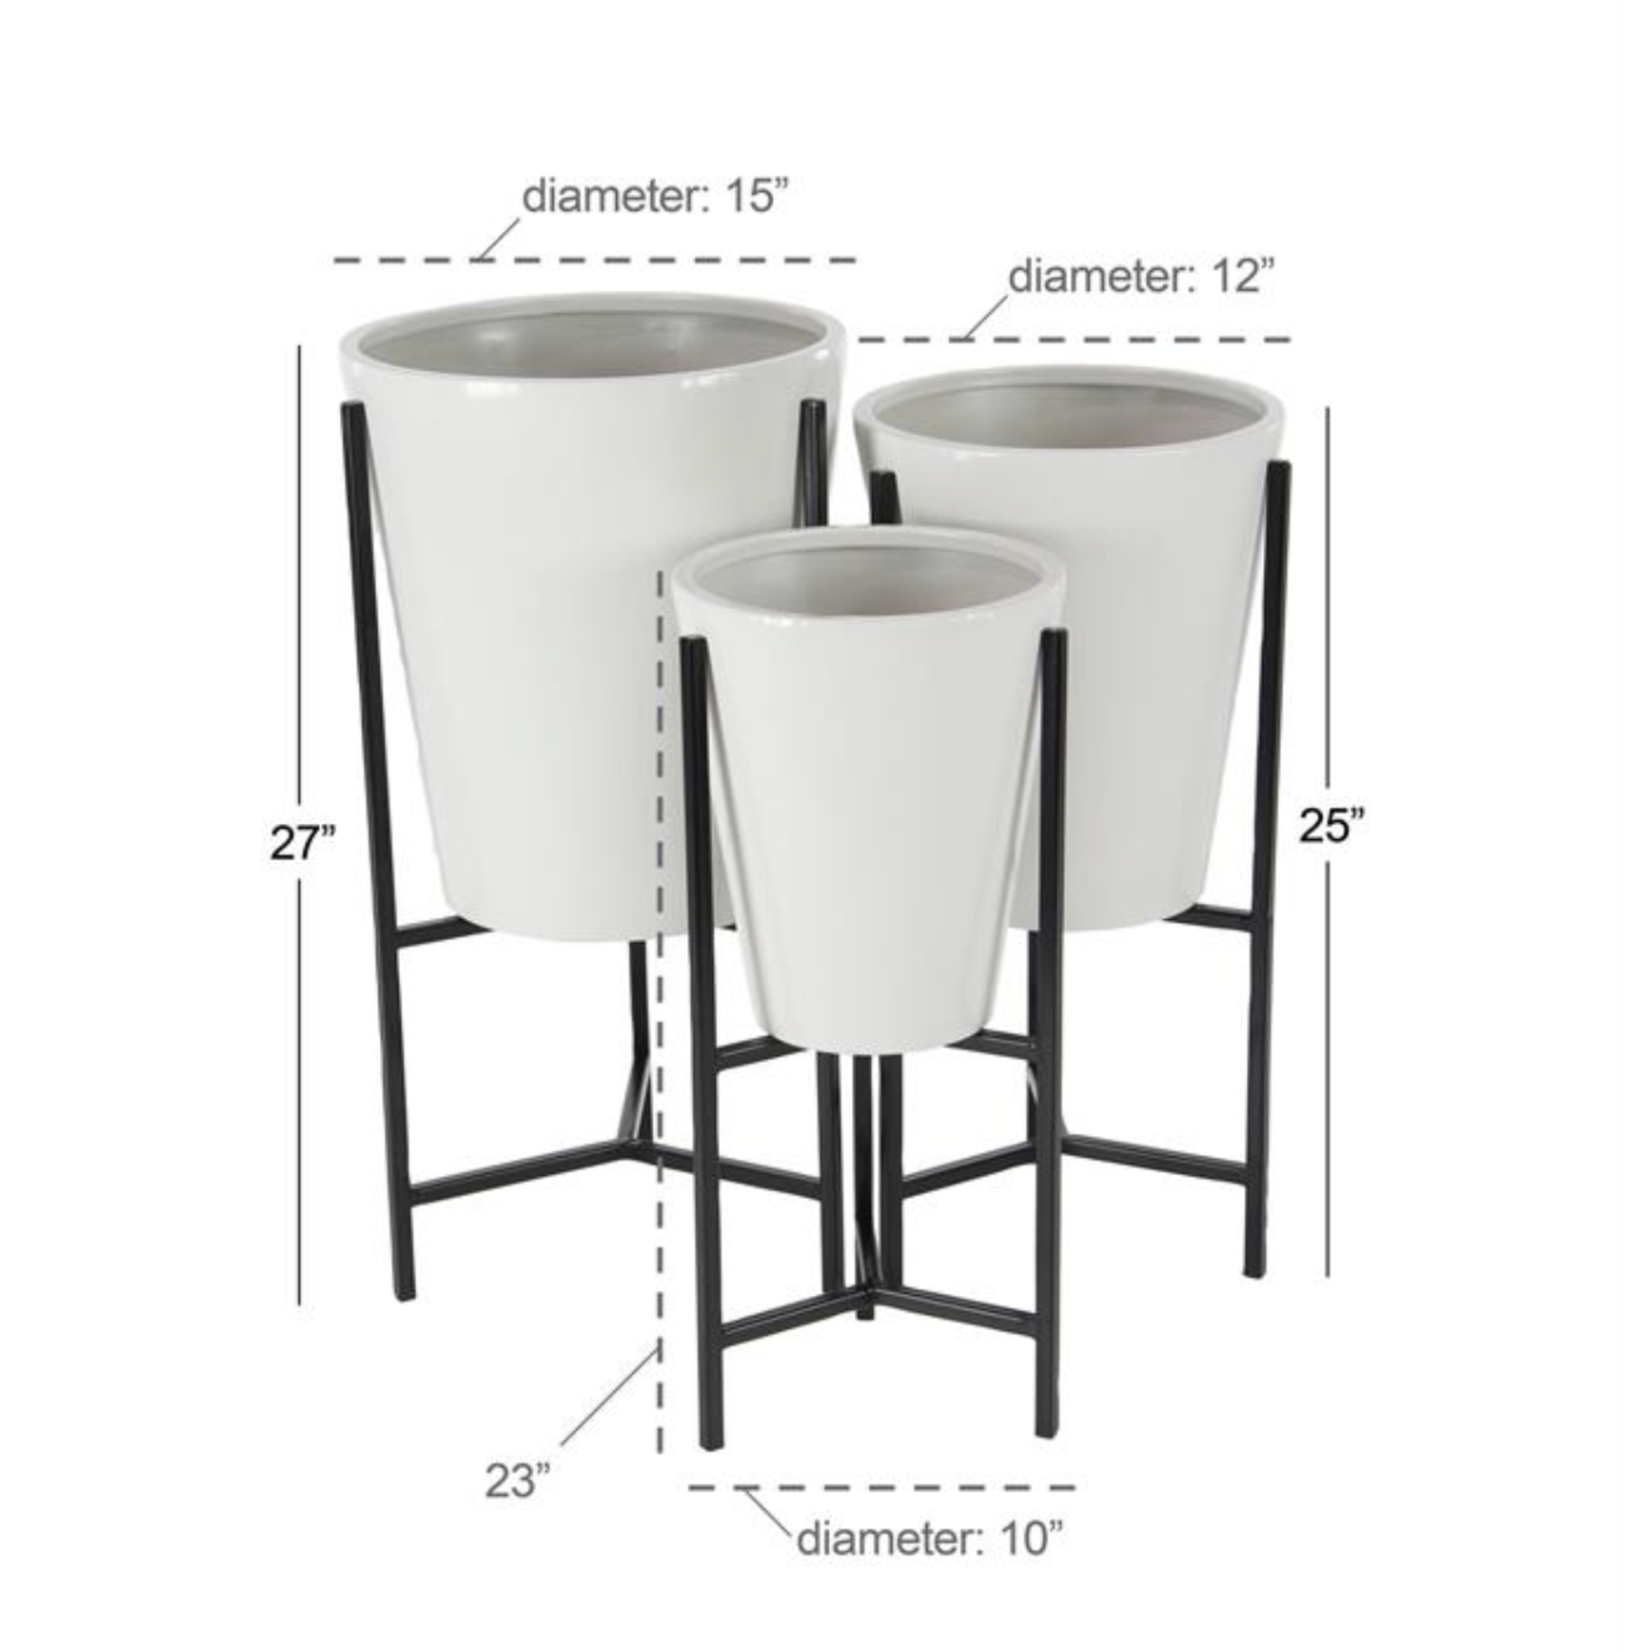 25”H X 12” MEDIUM GLOSSY WHITE TAPERED MODERN METAL PLANTER WITH METAL STAND (NOT WATER TIGHT)